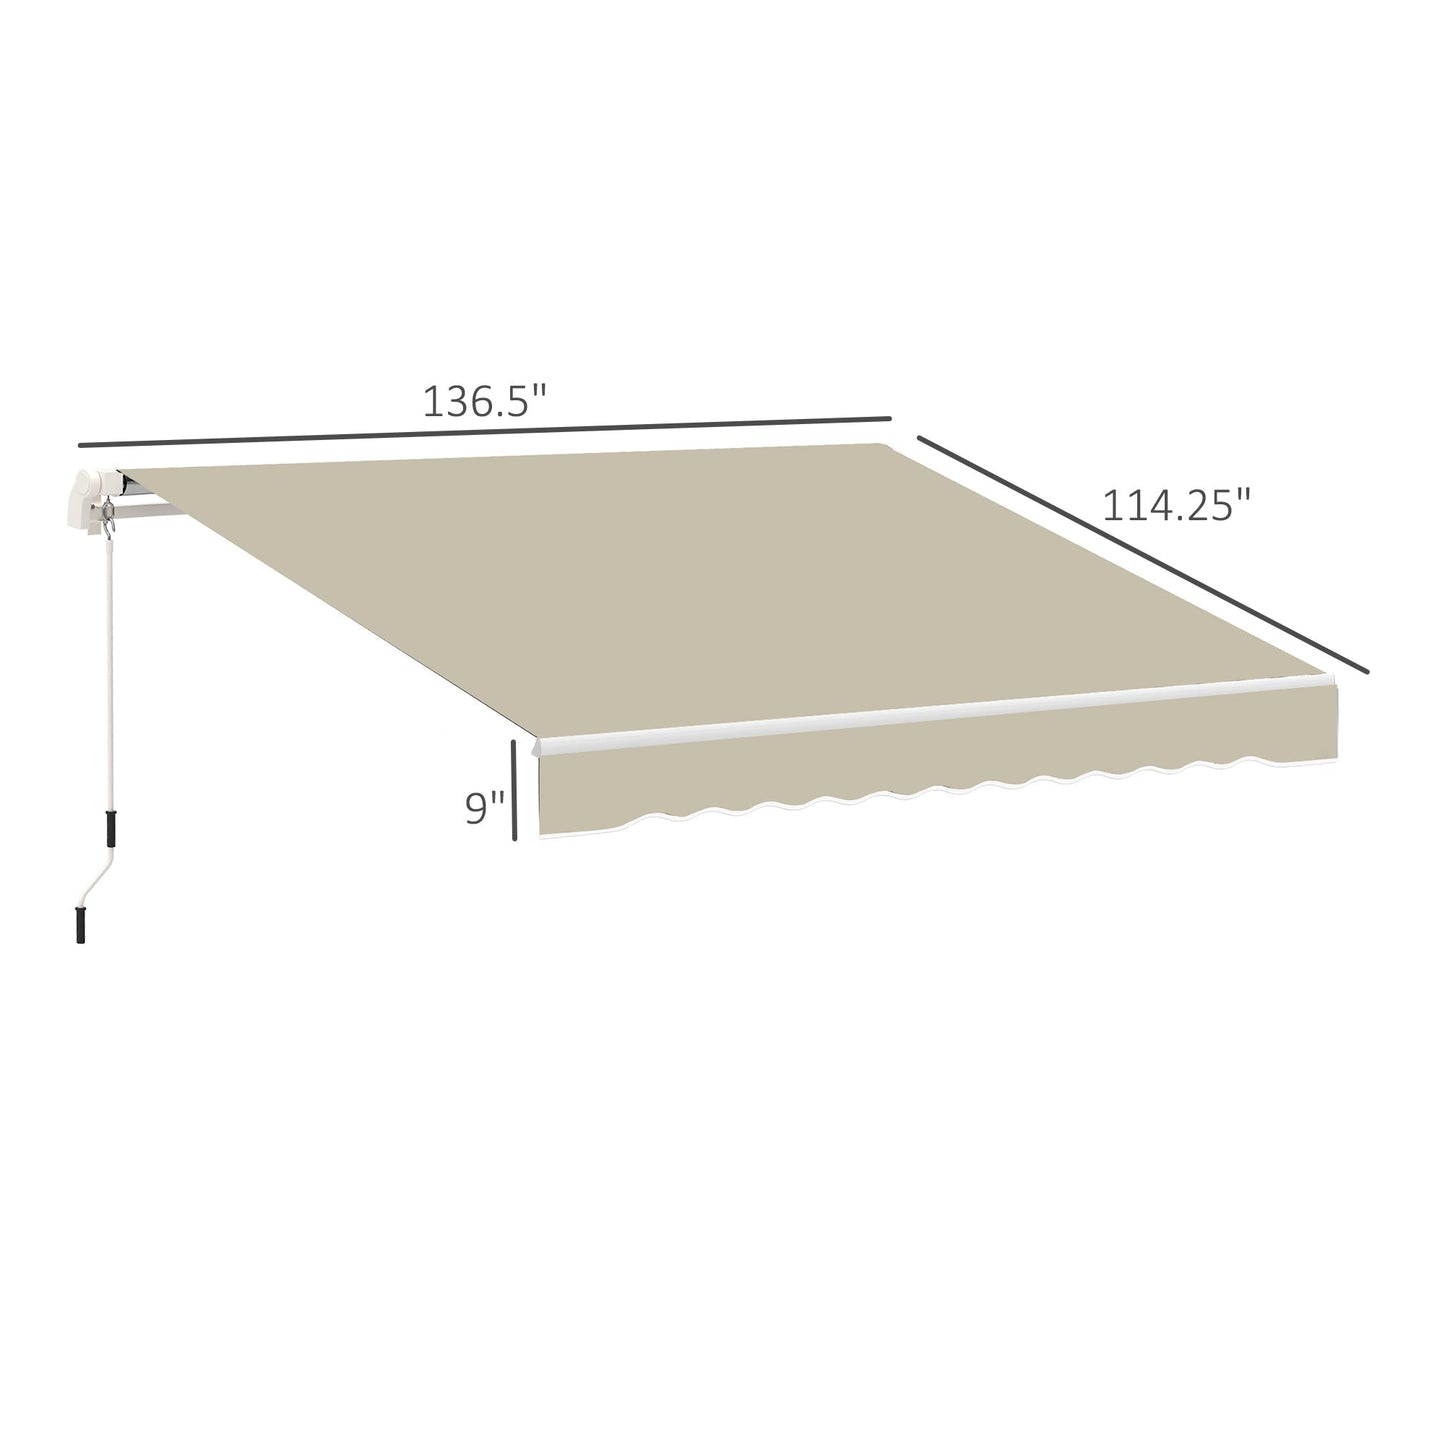 11' x 10' Retractable Awning Fabric Replacement Outdoor Sunshade Canopy Awning Cover, UV Protection, Cream White - Gallery Canada